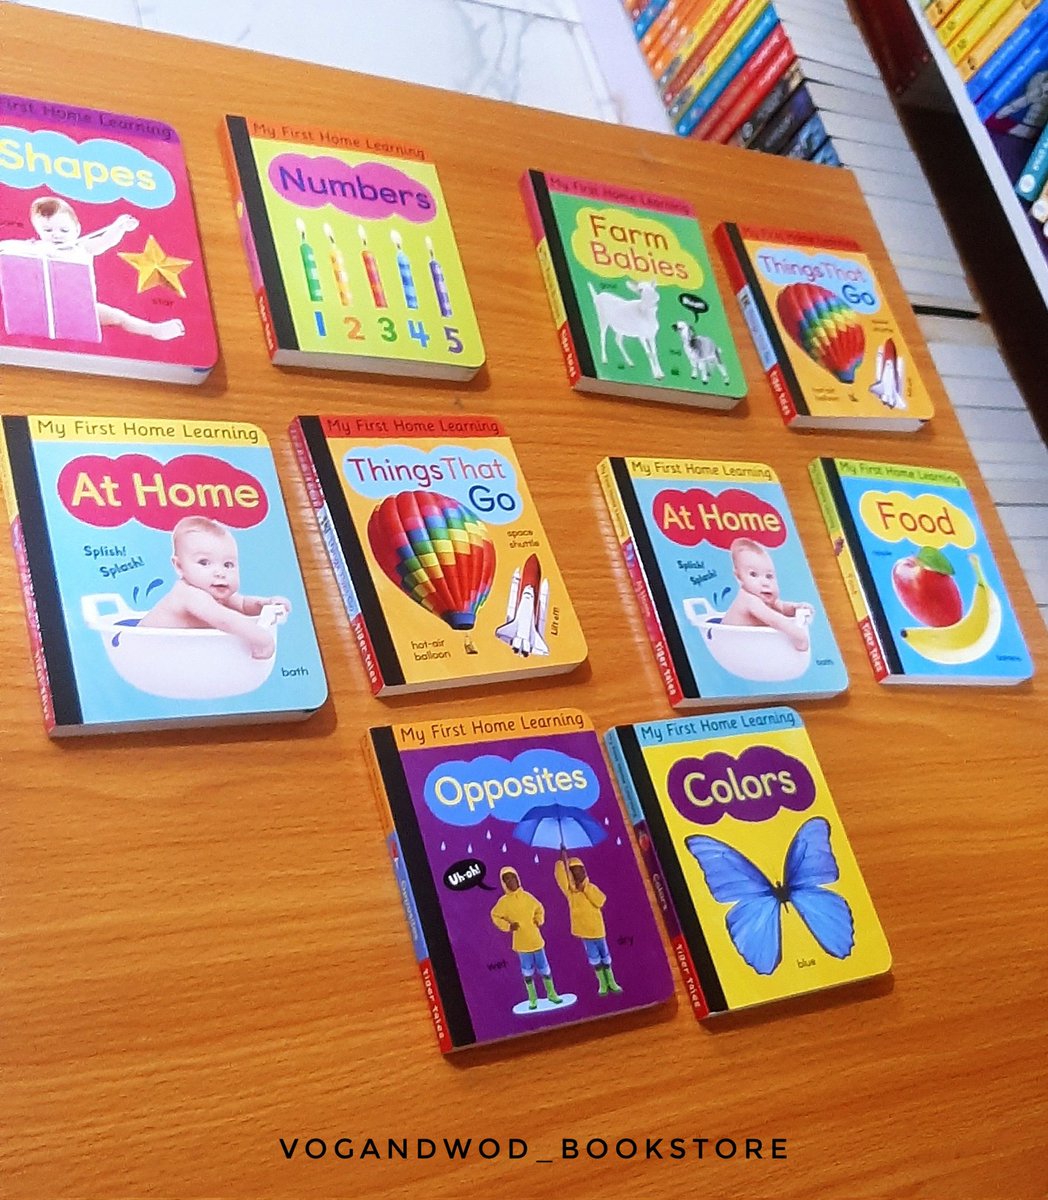 My first home learning
Shapes
Numbers
Colours
At home
Farm babies
Things that go
Food
Opposites and more

Available  in box set and singles

#vogandwodbooks
#vogandwodbookstore
#ikejabookshop
#bookstoresinlagos
#Myfirsthomelearningbooks
#Allyouneedisagoodbook
#readlearnknowgo